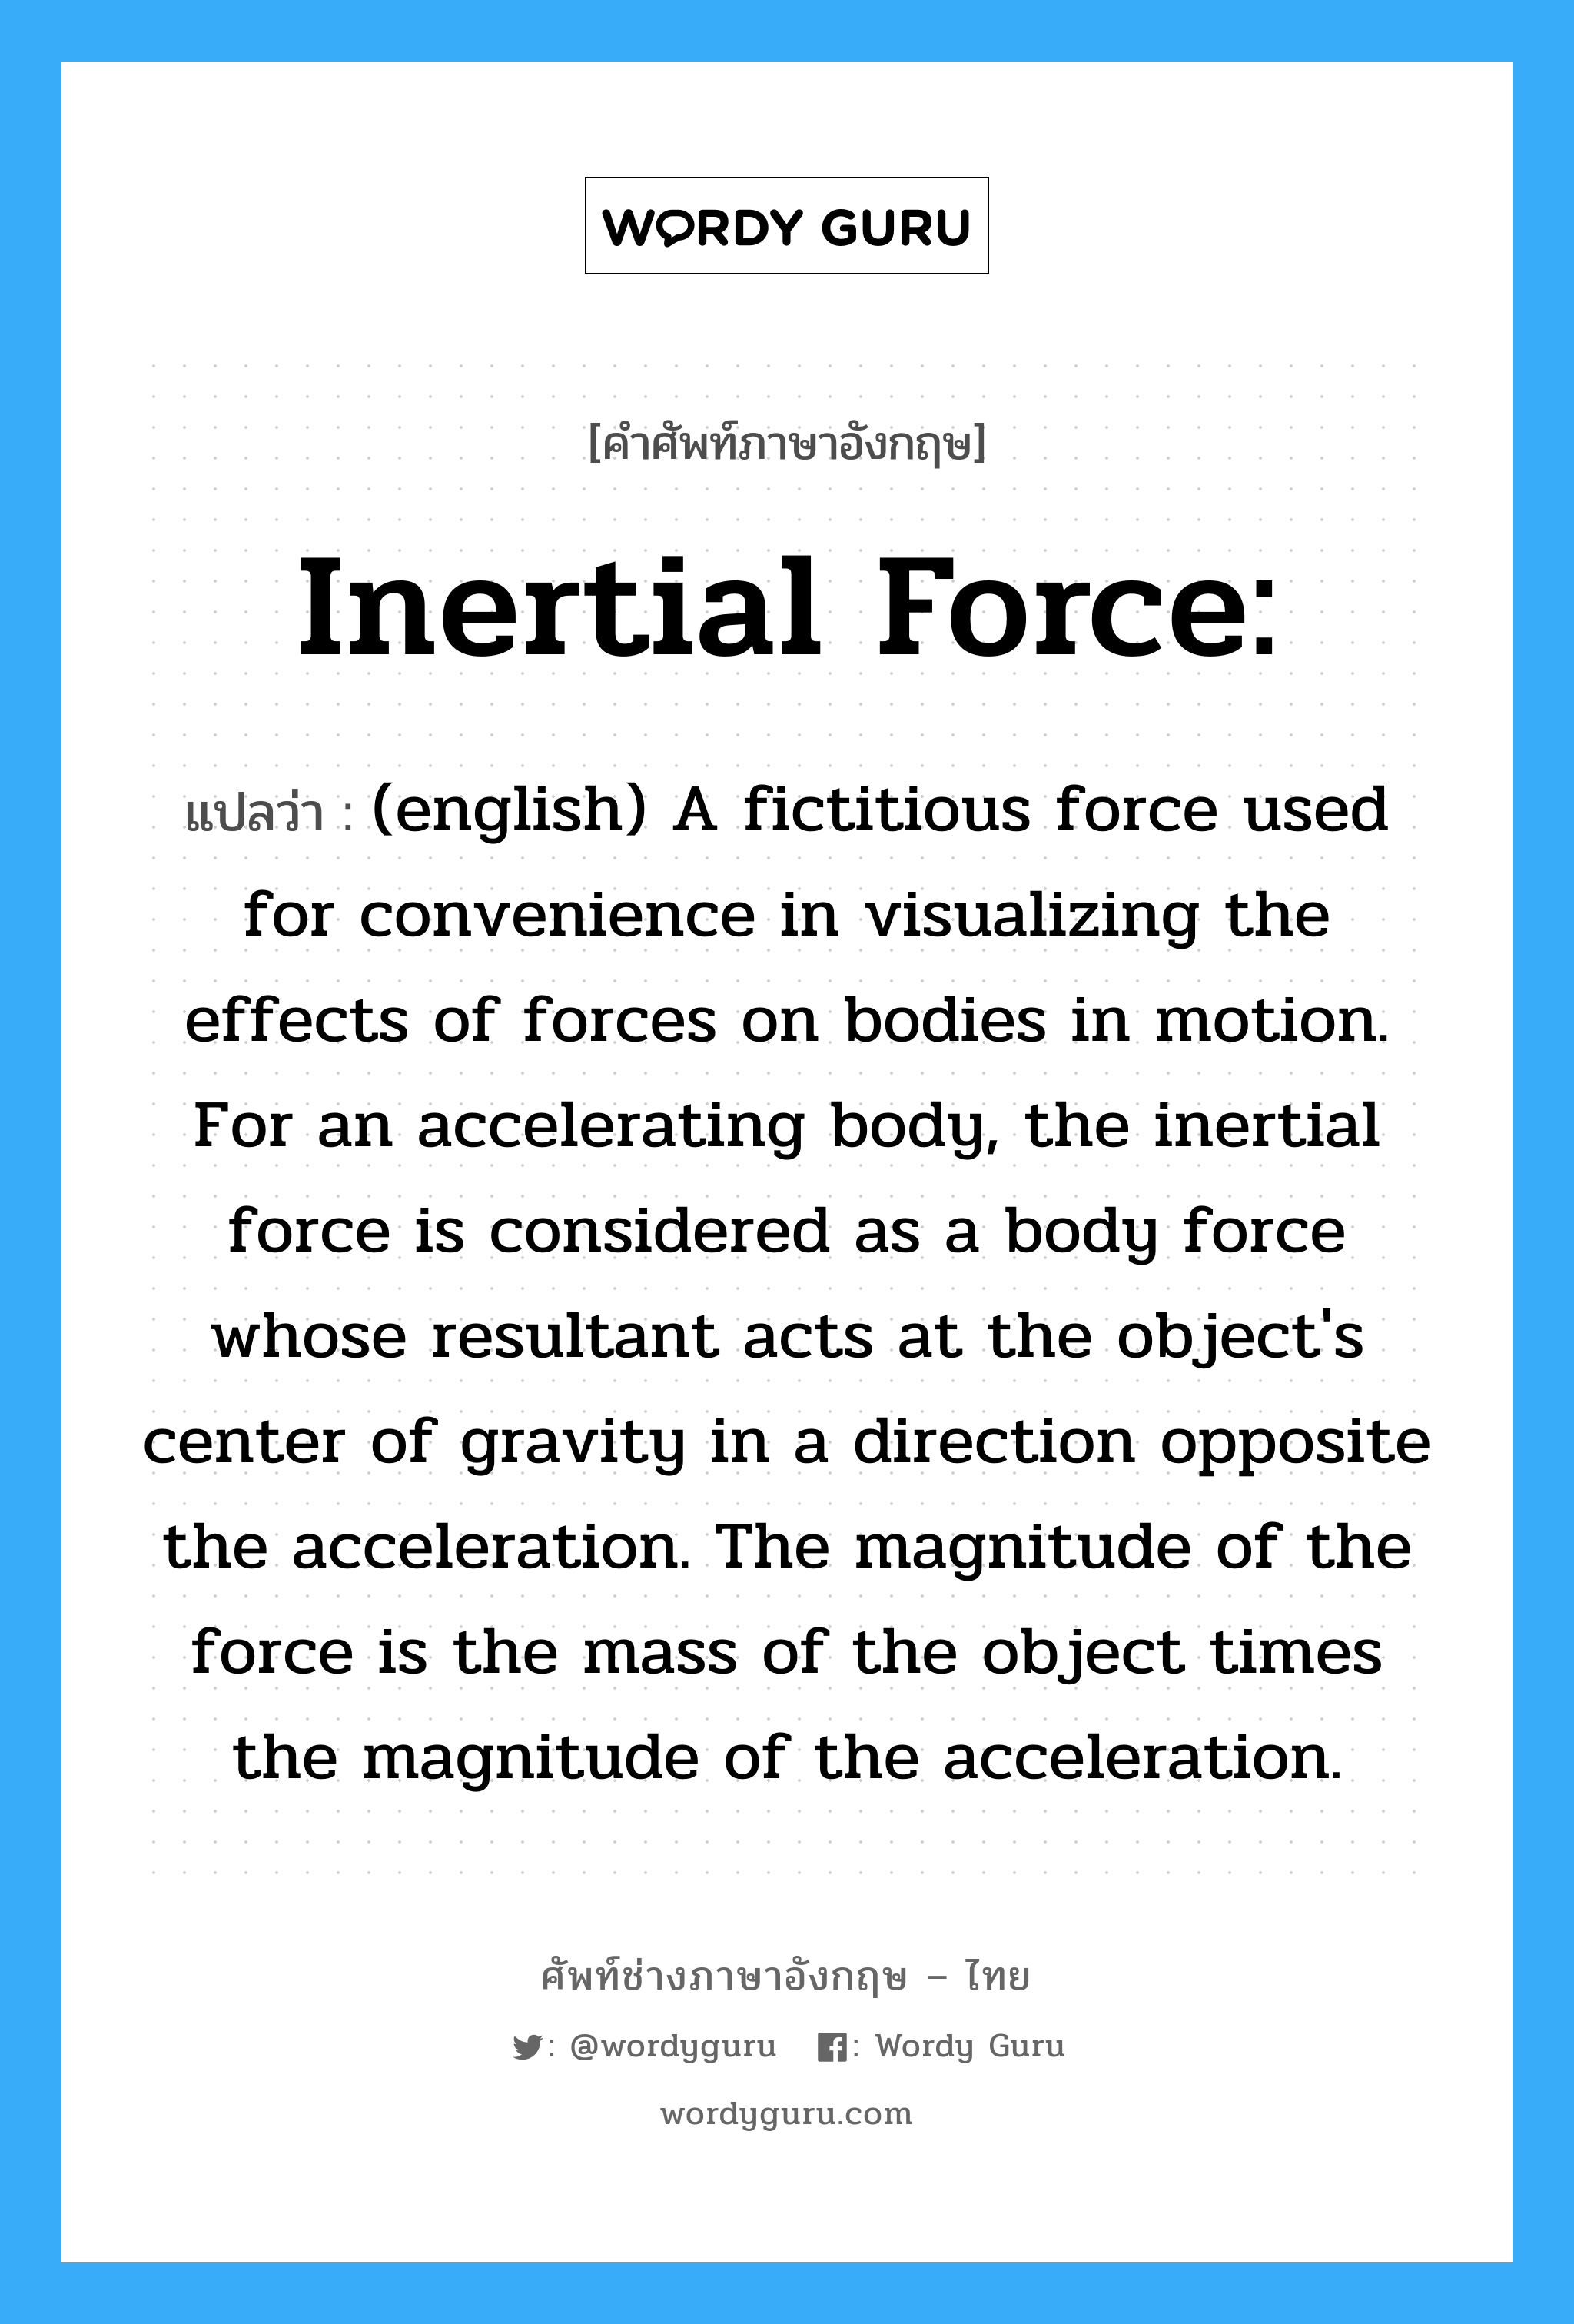 (english) A fictitious force used for convenience in visualizing the effects of forces on bodies in motion. For an accelerating body, the inertial force is considered as a body force whose resultant acts at the object's center of gravity in a direction opposite the acceleration. The magnitude of the force is the mass of the object times the magnitude of the acceleration. ภาษาอังกฤษ?, คำศัพท์ช่างภาษาอังกฤษ - ไทย (english) A fictitious force used for convenience in visualizing the effects of forces on bodies in motion. For an accelerating body, the inertial force is considered as a body force whose resultant acts at the object's center of gravity in a direction opposite the acceleration. The magnitude of the force is the mass of the object times the magnitude of the acceleration. คำศัพท์ภาษาอังกฤษ (english) A fictitious force used for convenience in visualizing the effects of forces on bodies in motion. For an accelerating body, the inertial force is considered as a body force whose resultant acts at the object's center of gravity in a direction opposite the acceleration. The magnitude of the force is the mass of the object times the magnitude of the acceleration. แปลว่า Inertial Force: